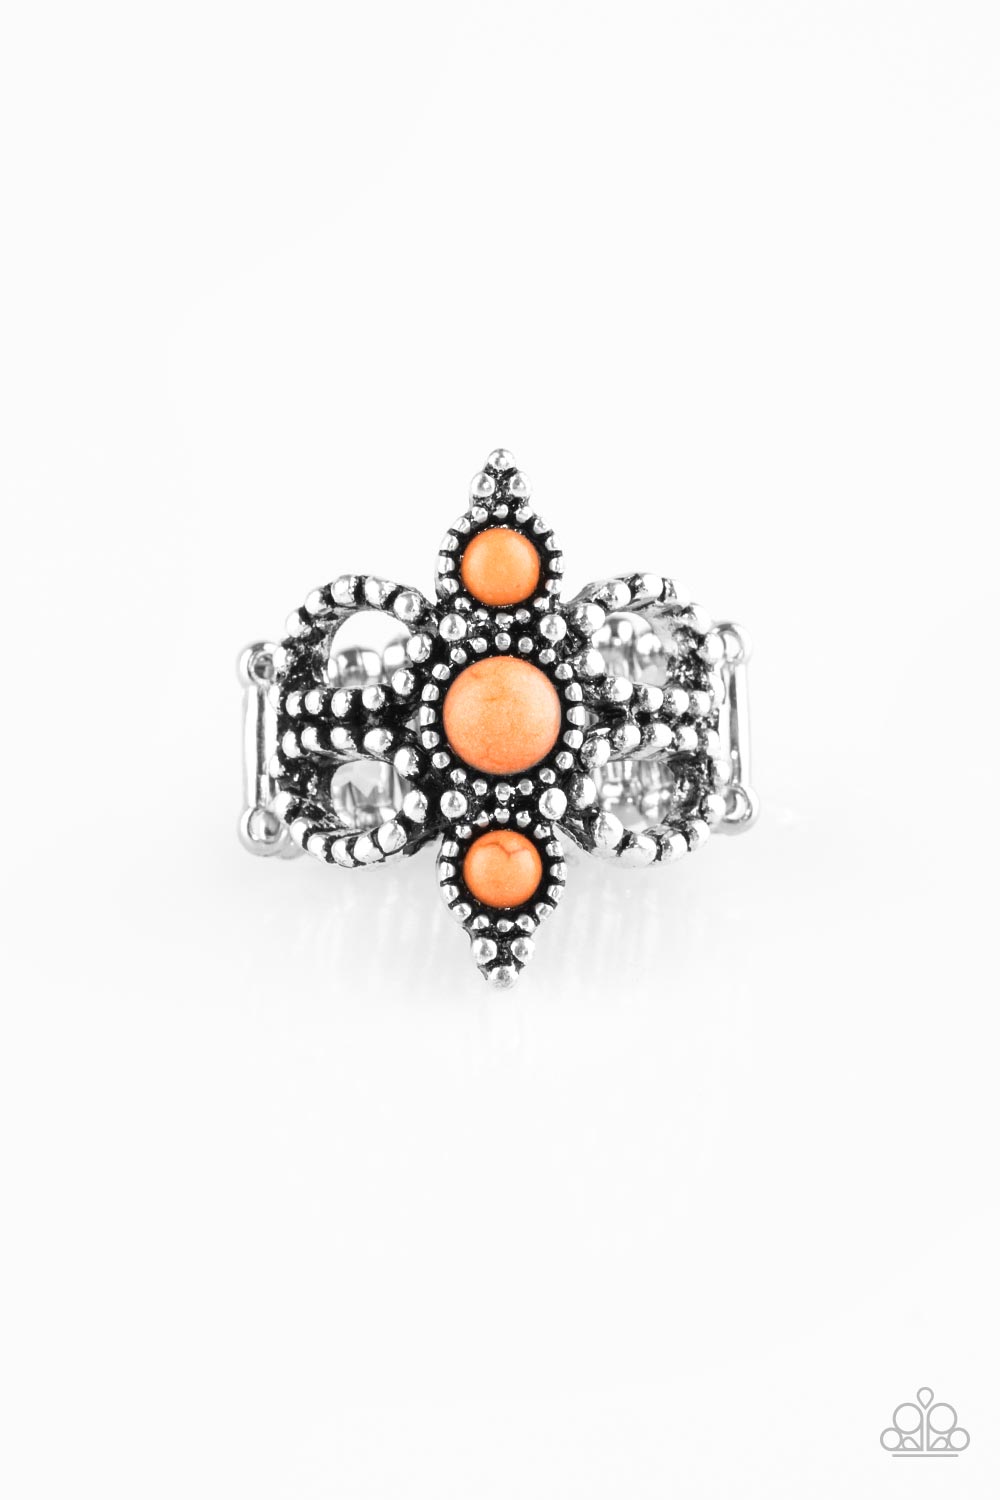 Paparazzi Accessories Outback Oasis - Orange Ring